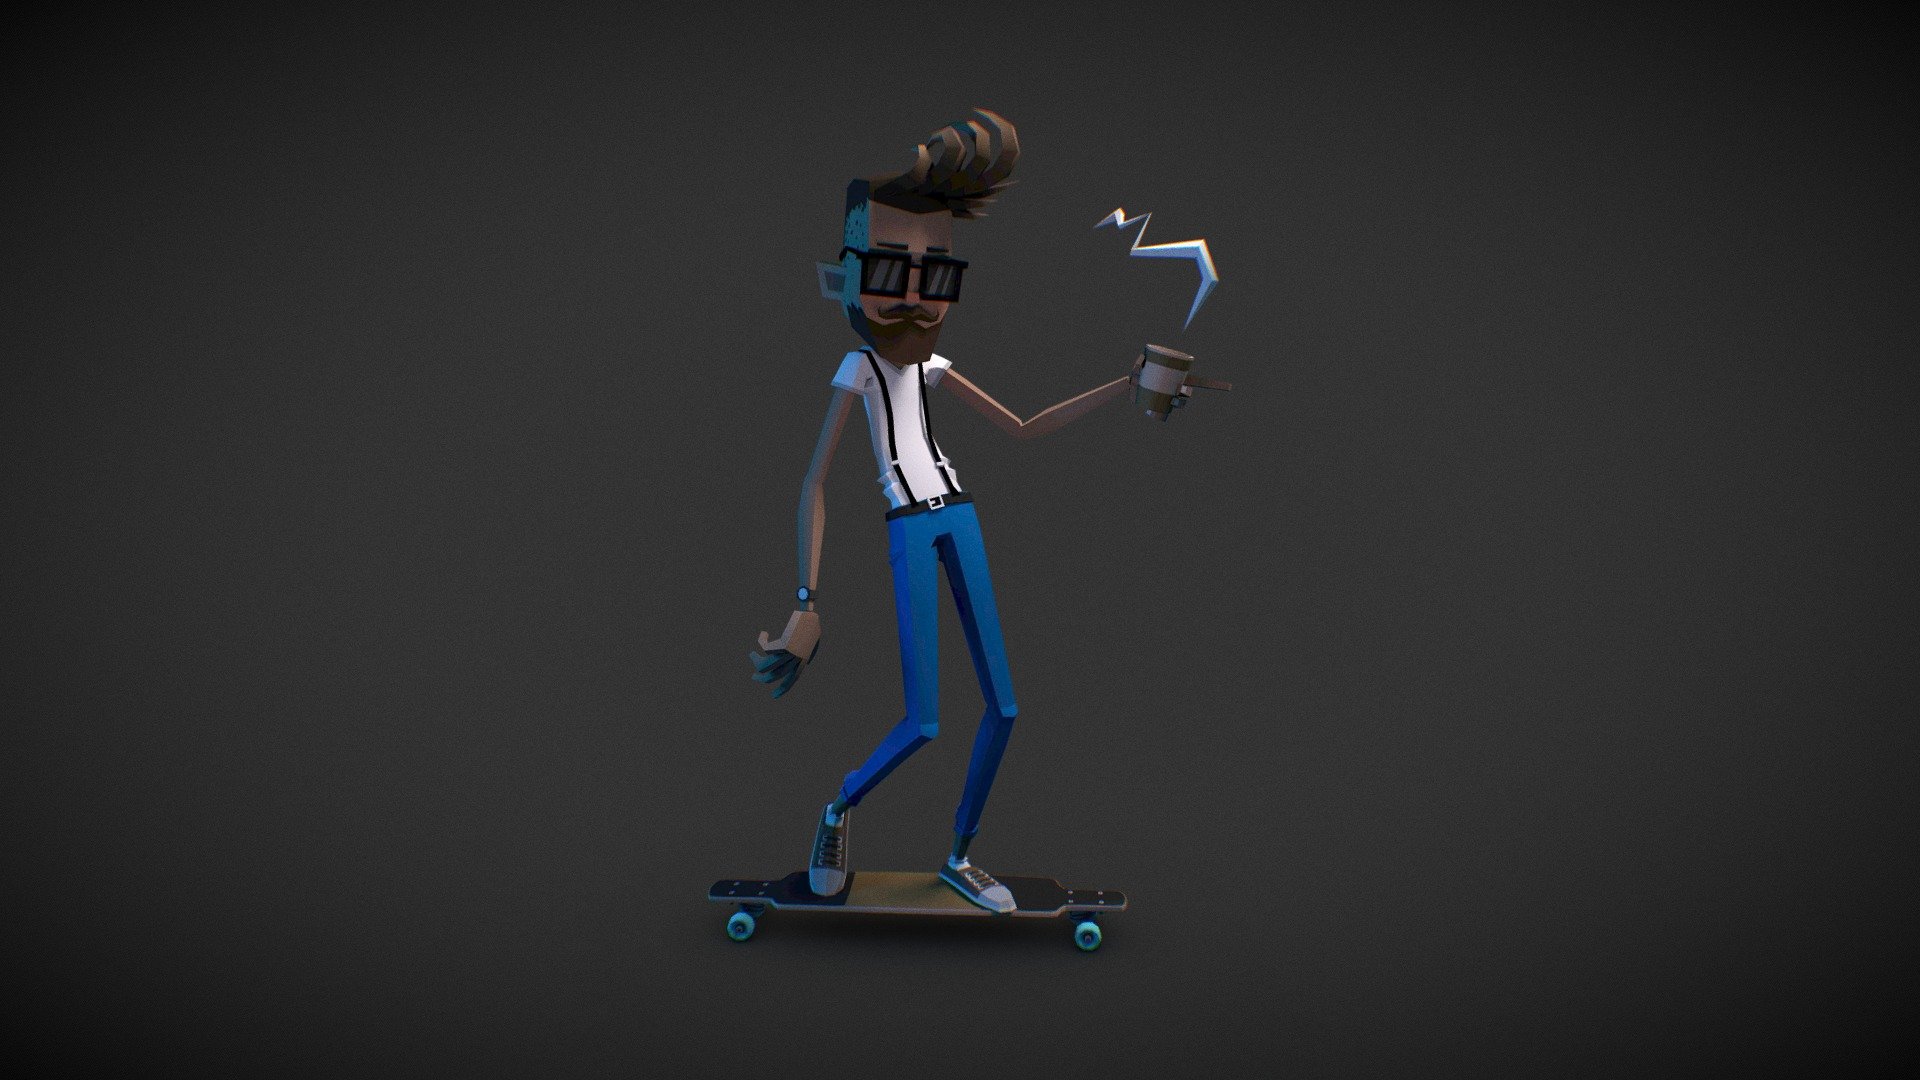 This is one of the characters in development for Pocket Skate

Thanks, for checking it out!
- Pete - Hipster - Pocket Skate - 3D model by Pocket Skate! (@PocketSkate) 3d model